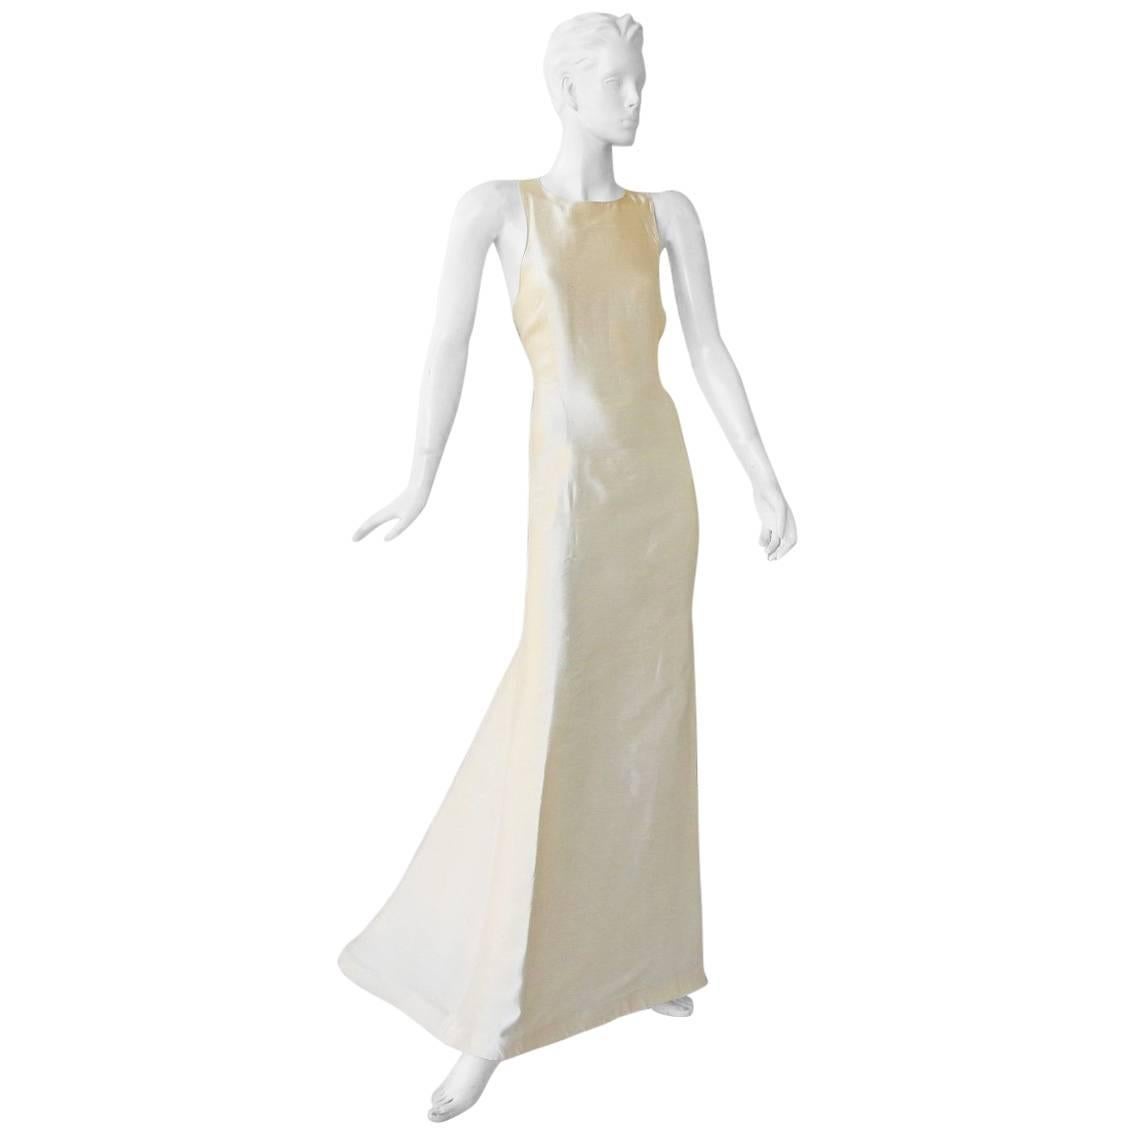 Valentino White Bondage Runway Finale Dress Gown with Jeweled Buckles and Train 